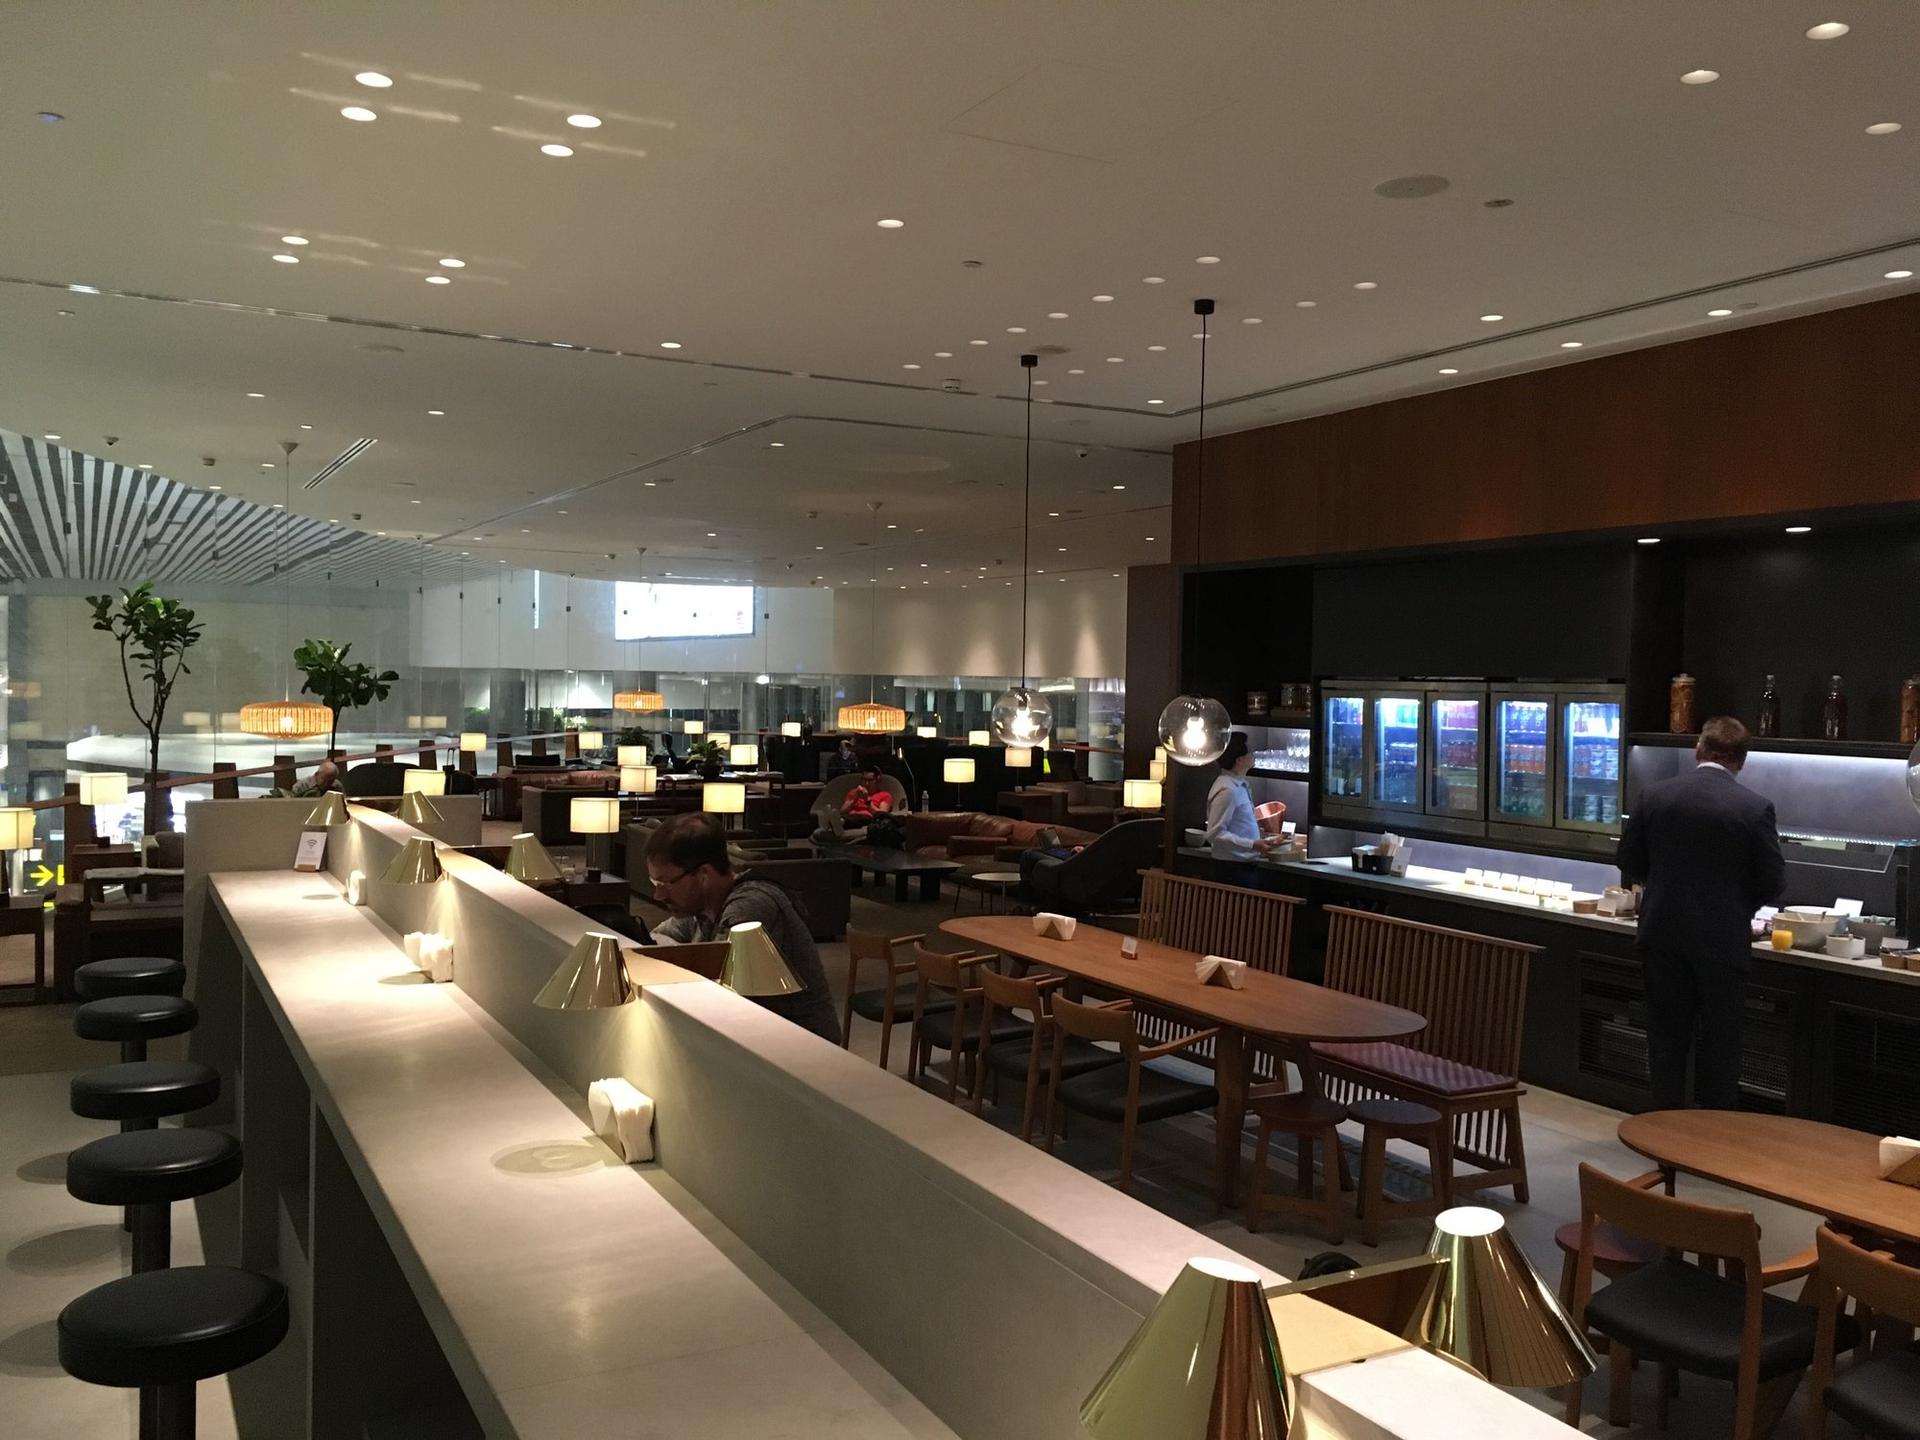 Cathay Pacific Lounge image 46 of 60